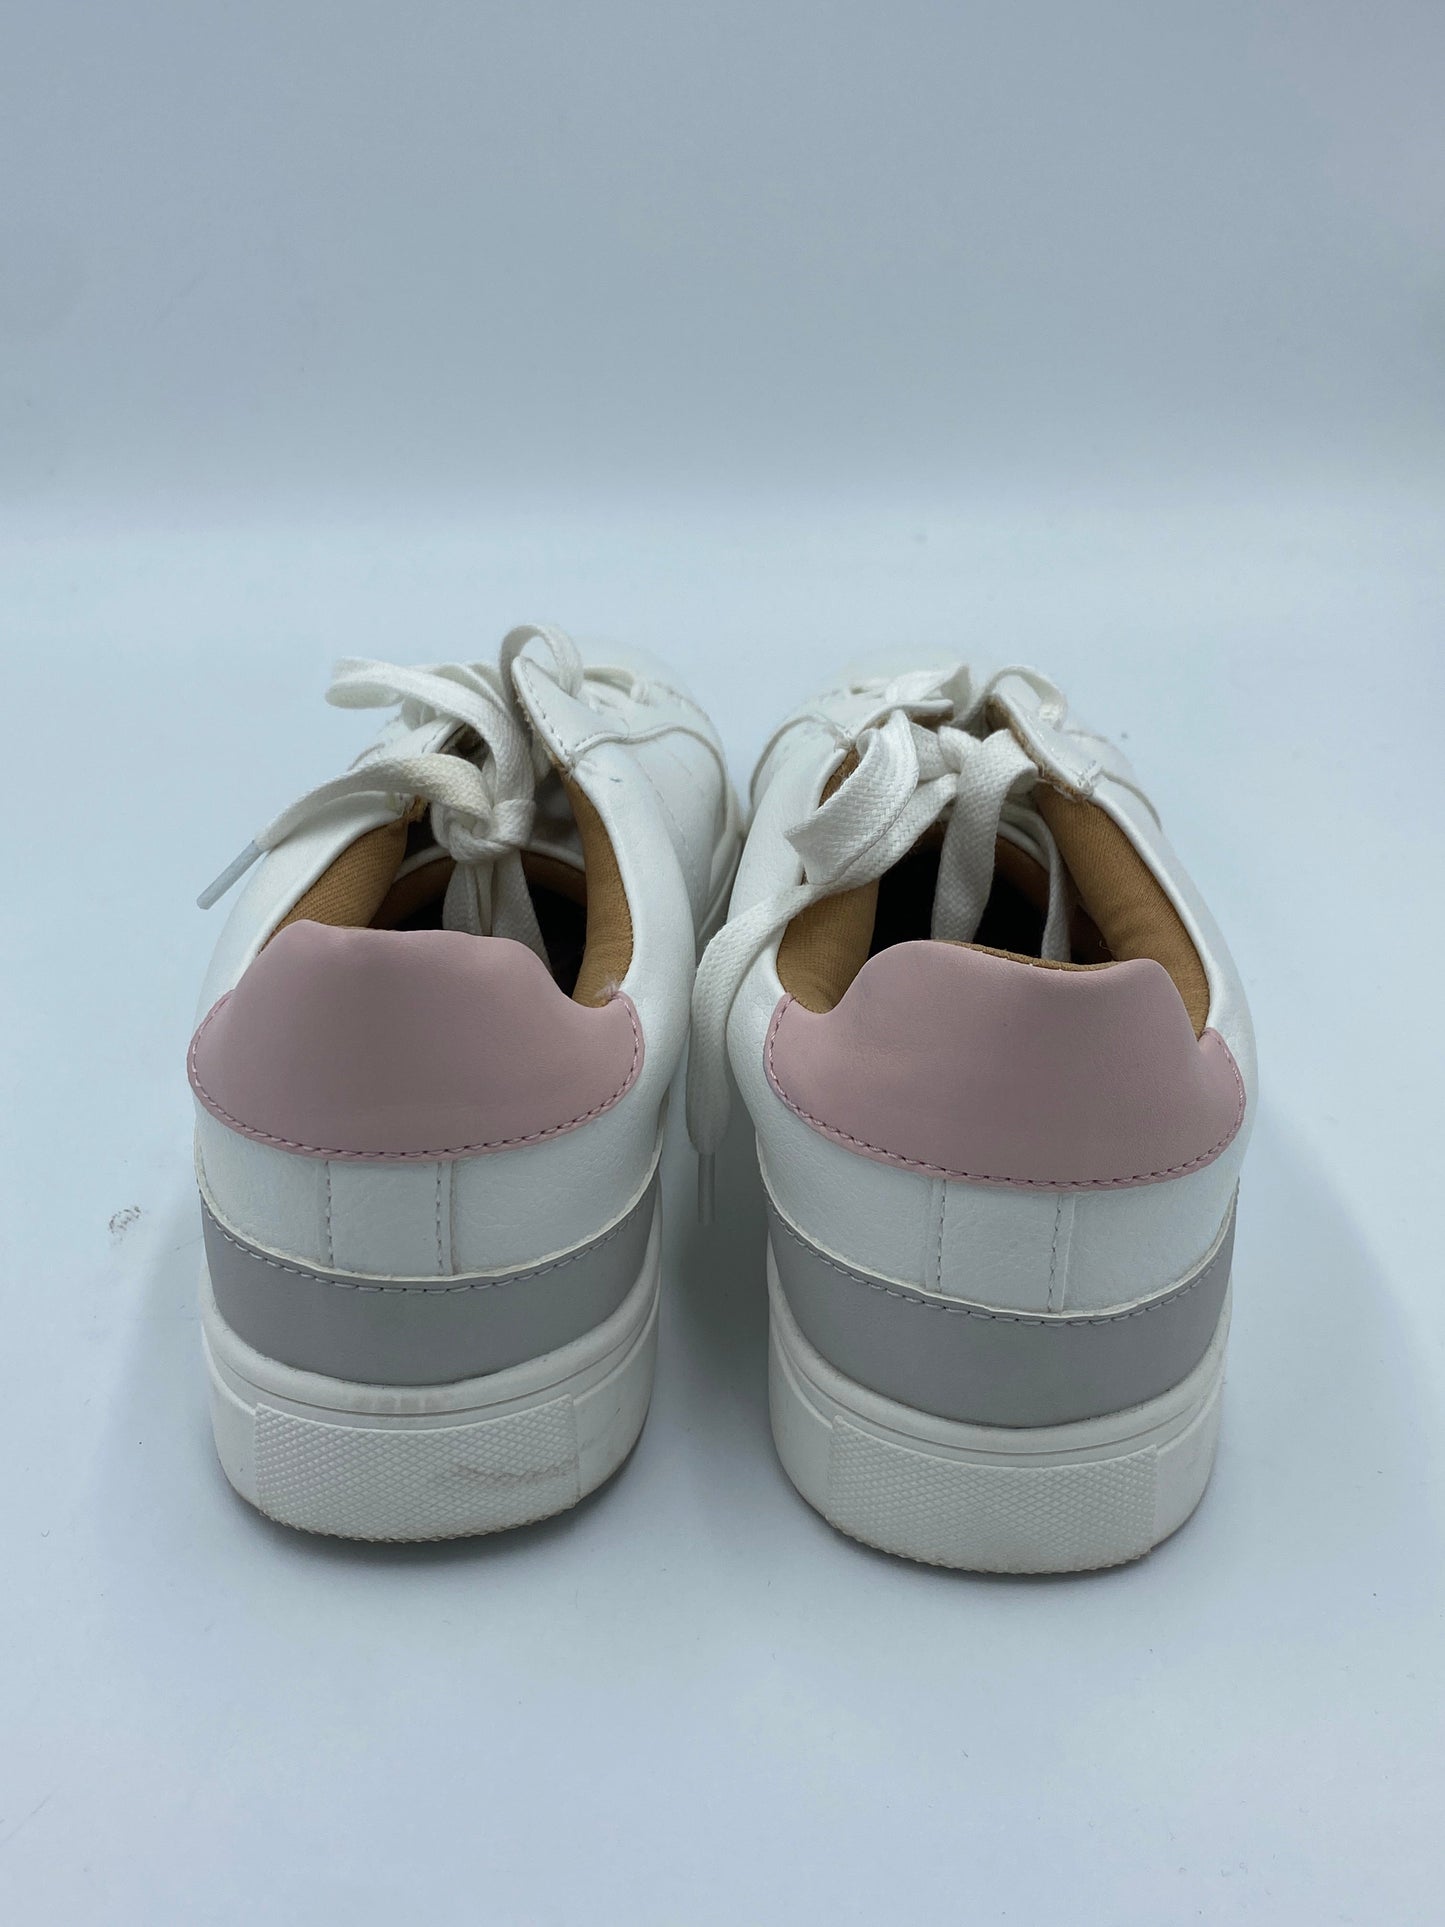 White Shoes Athletic Dolce Vita, Size 9